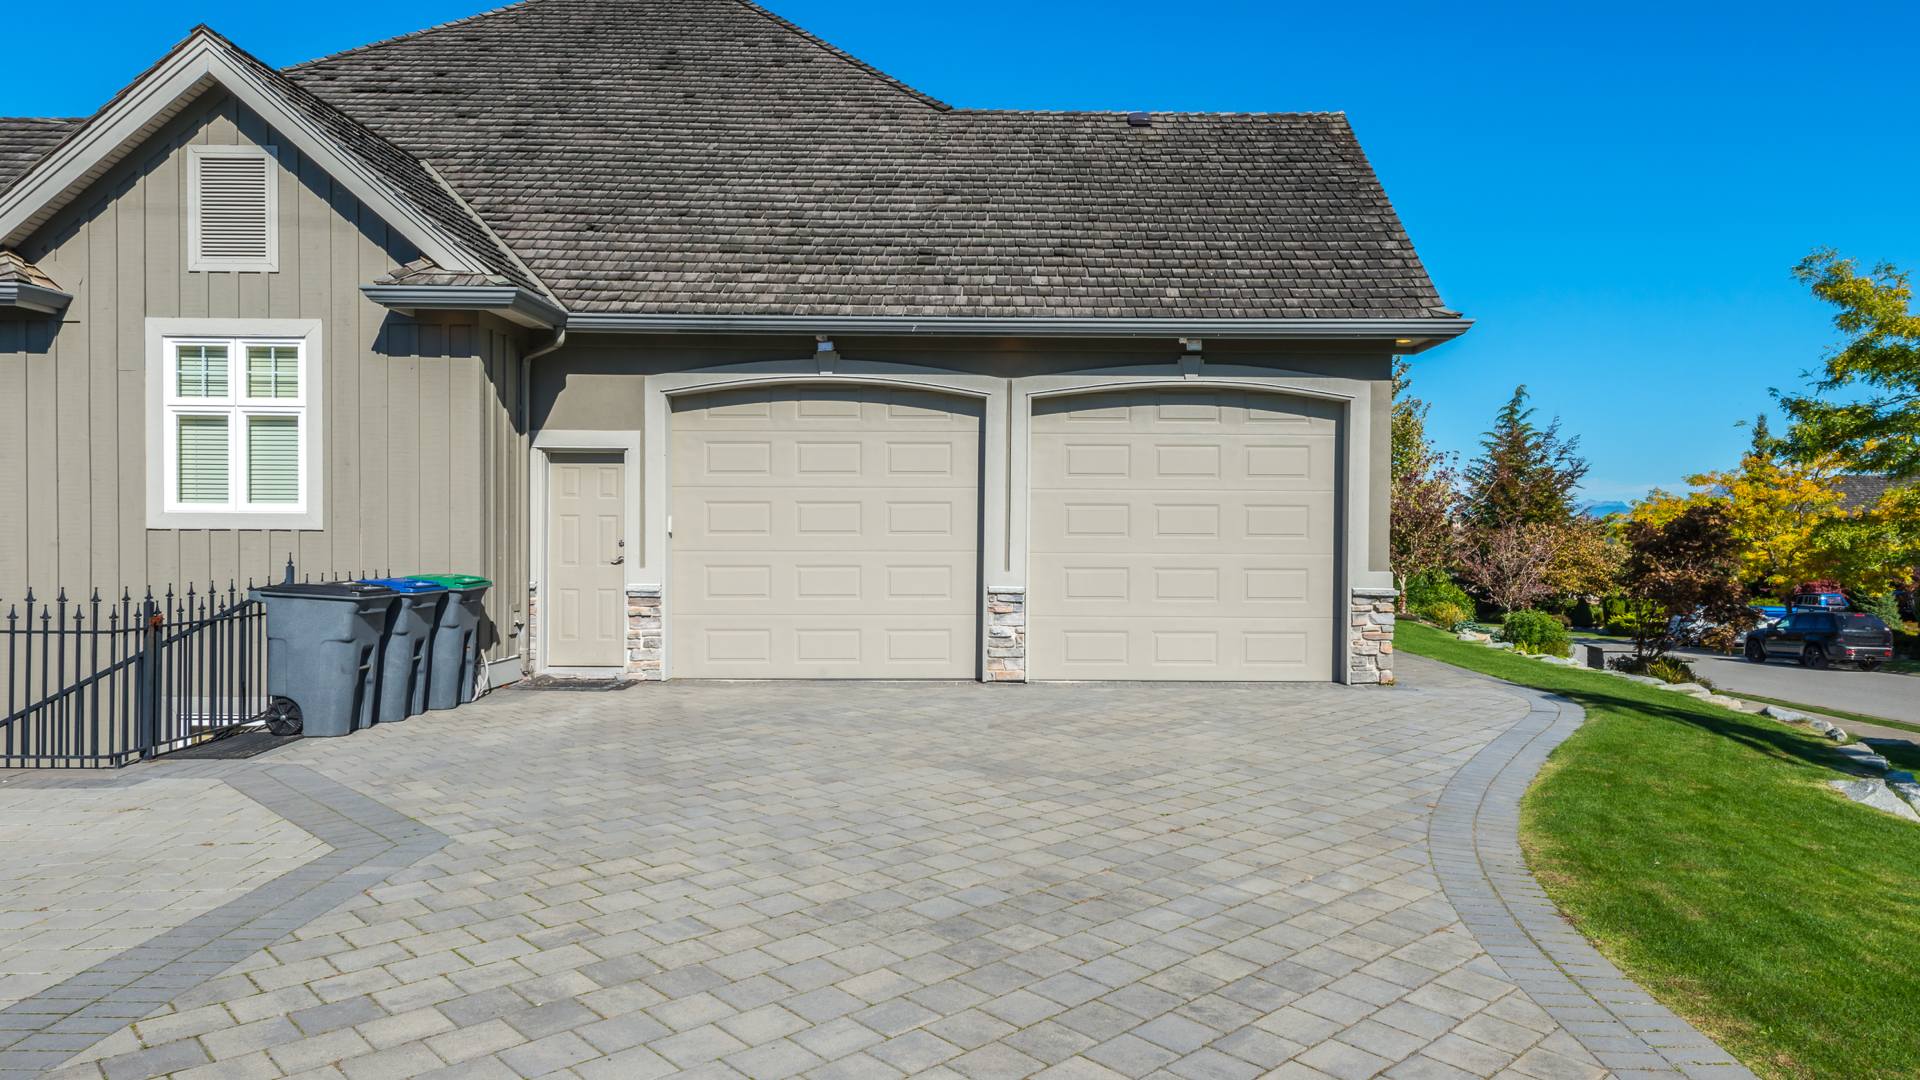 Stone pavers for driveway installed in Glen Carbon, IL.